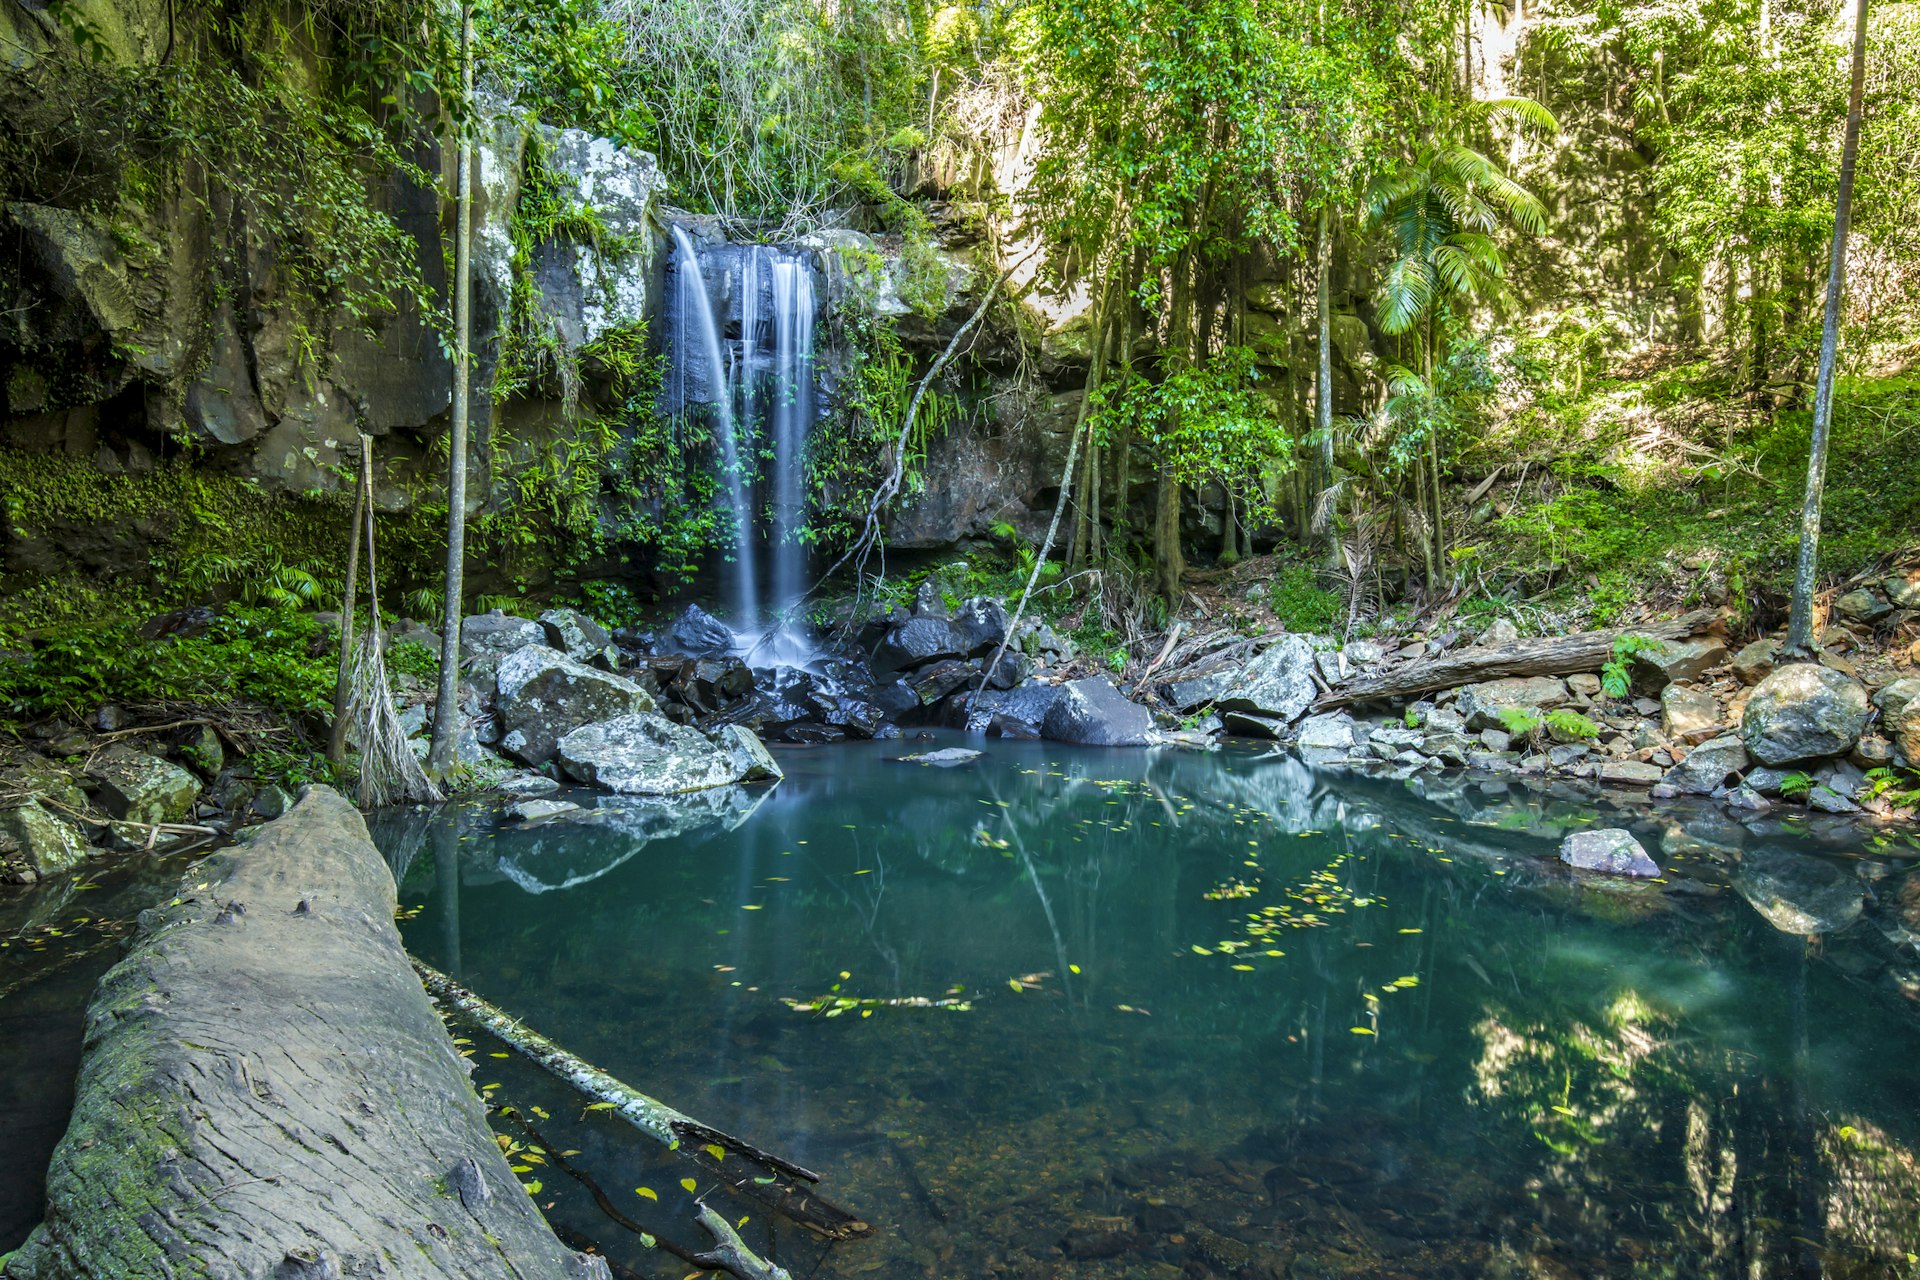 A waterfall plunges into a pool in a rainforest